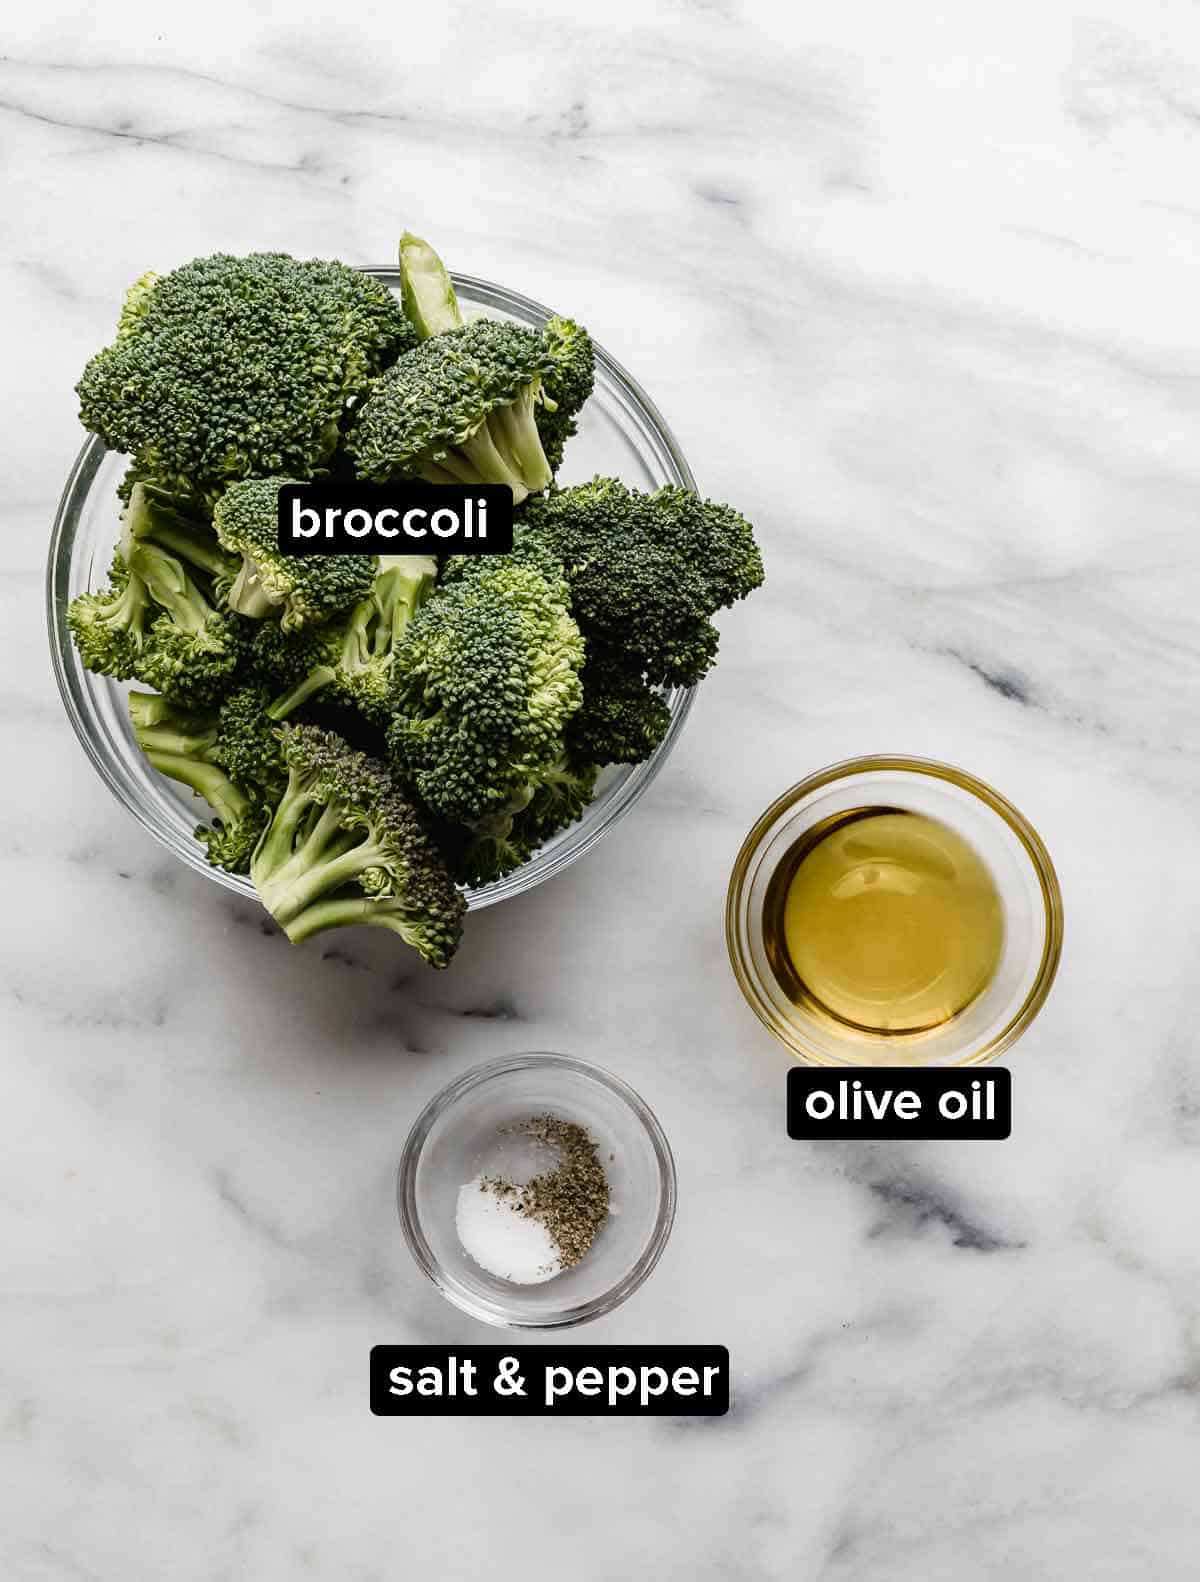 Oven Roasted Broccoli ingredients on a white marble background: broccoli florets, olive oil, salt and pepper.